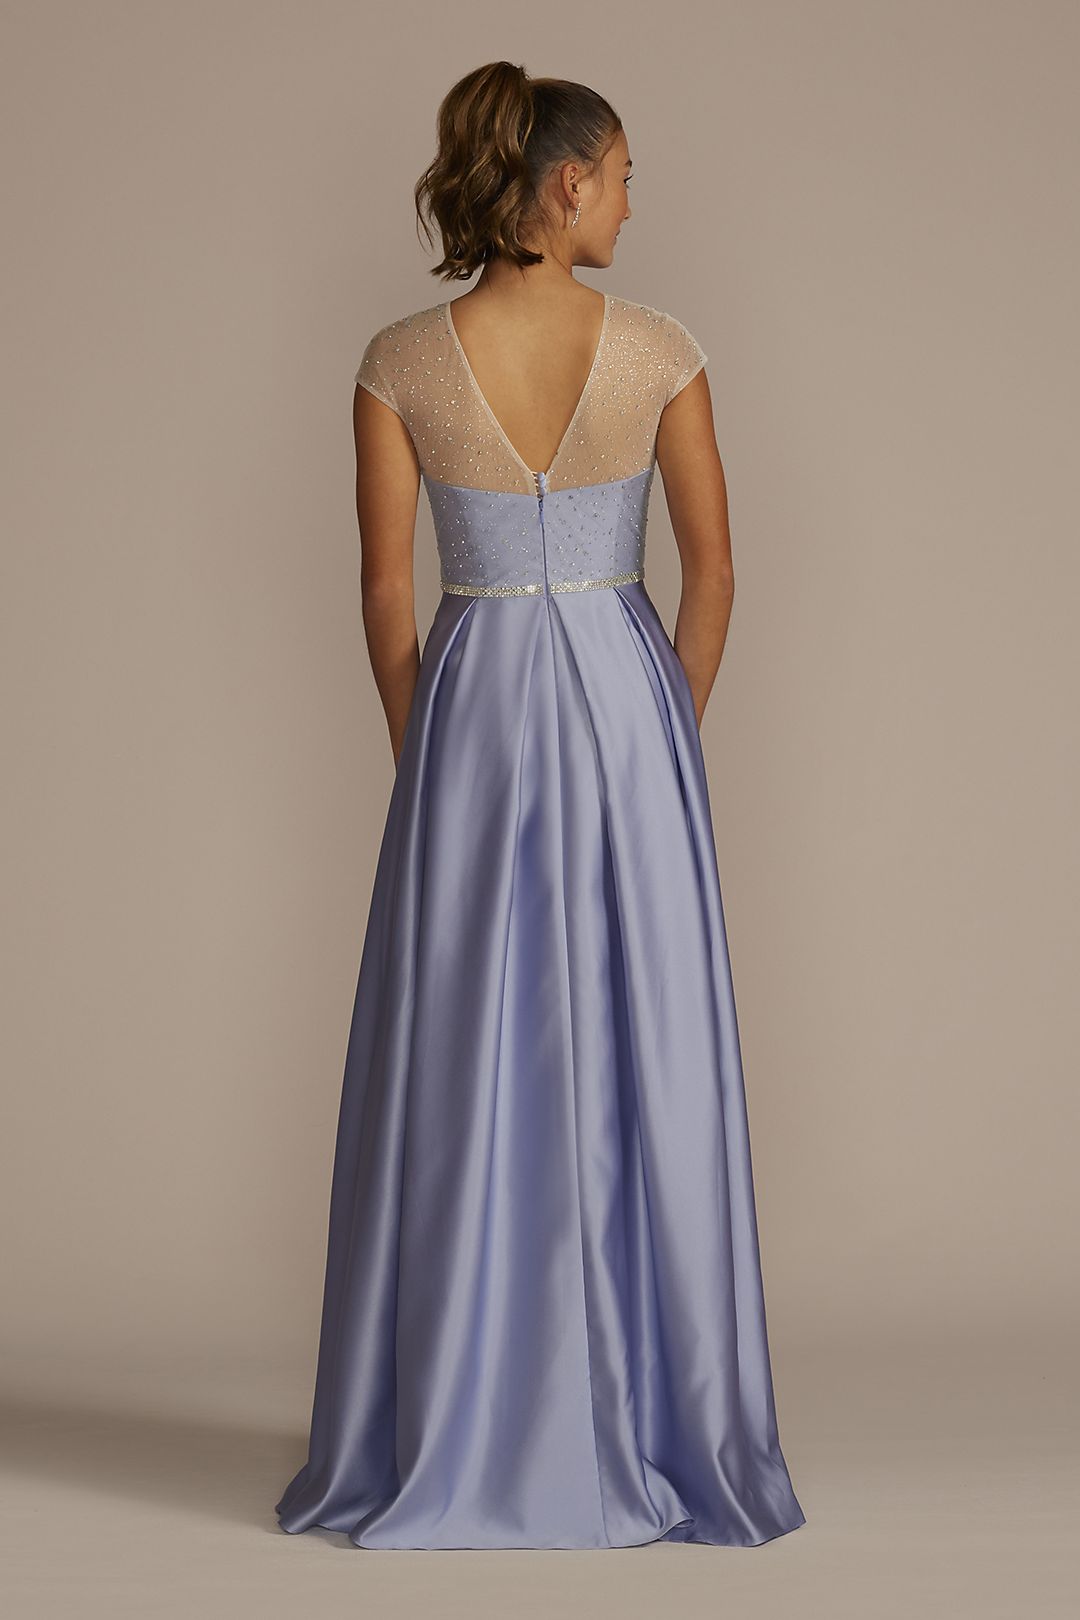 Satin Ball Gown with Sheer Embellished Top Image 2